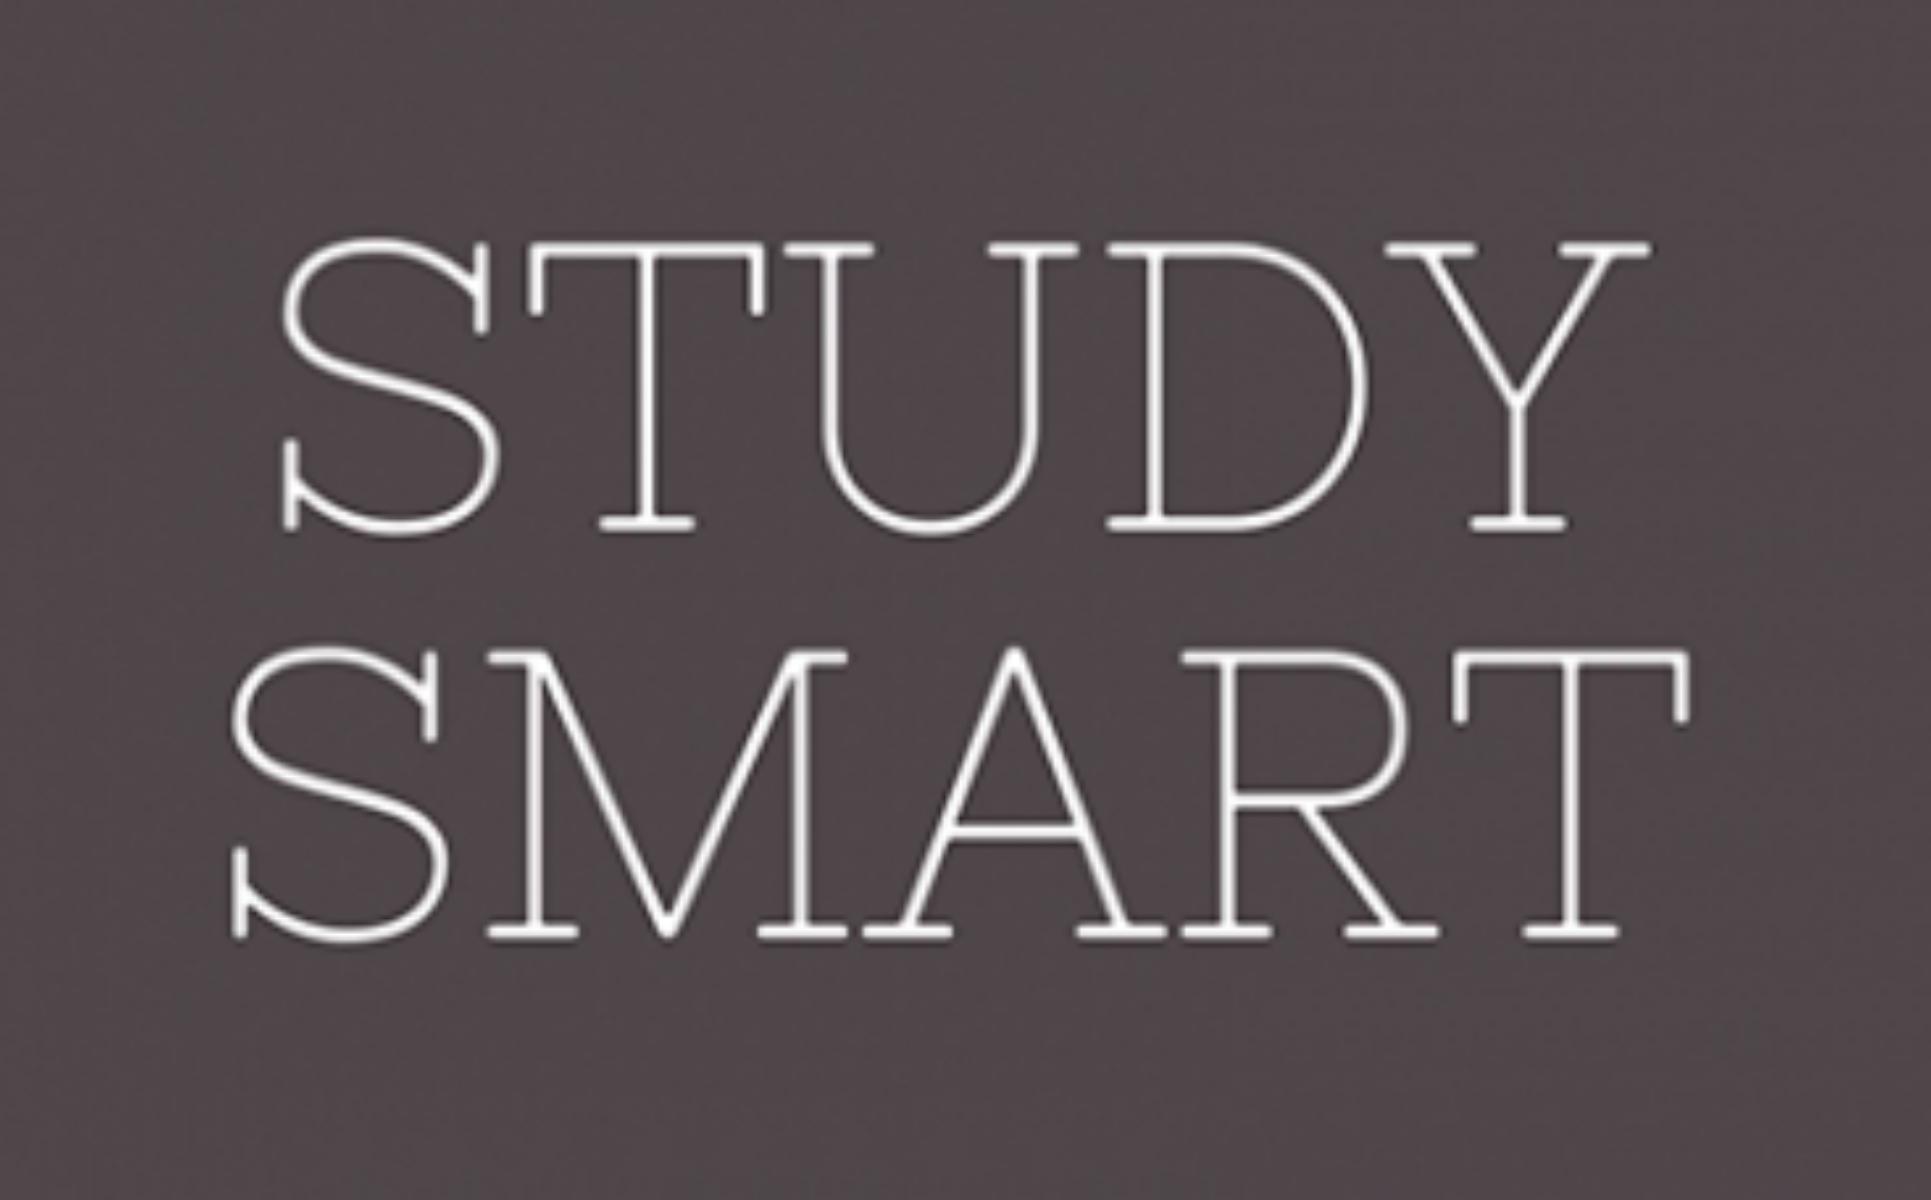 4 Rules For Smart Study